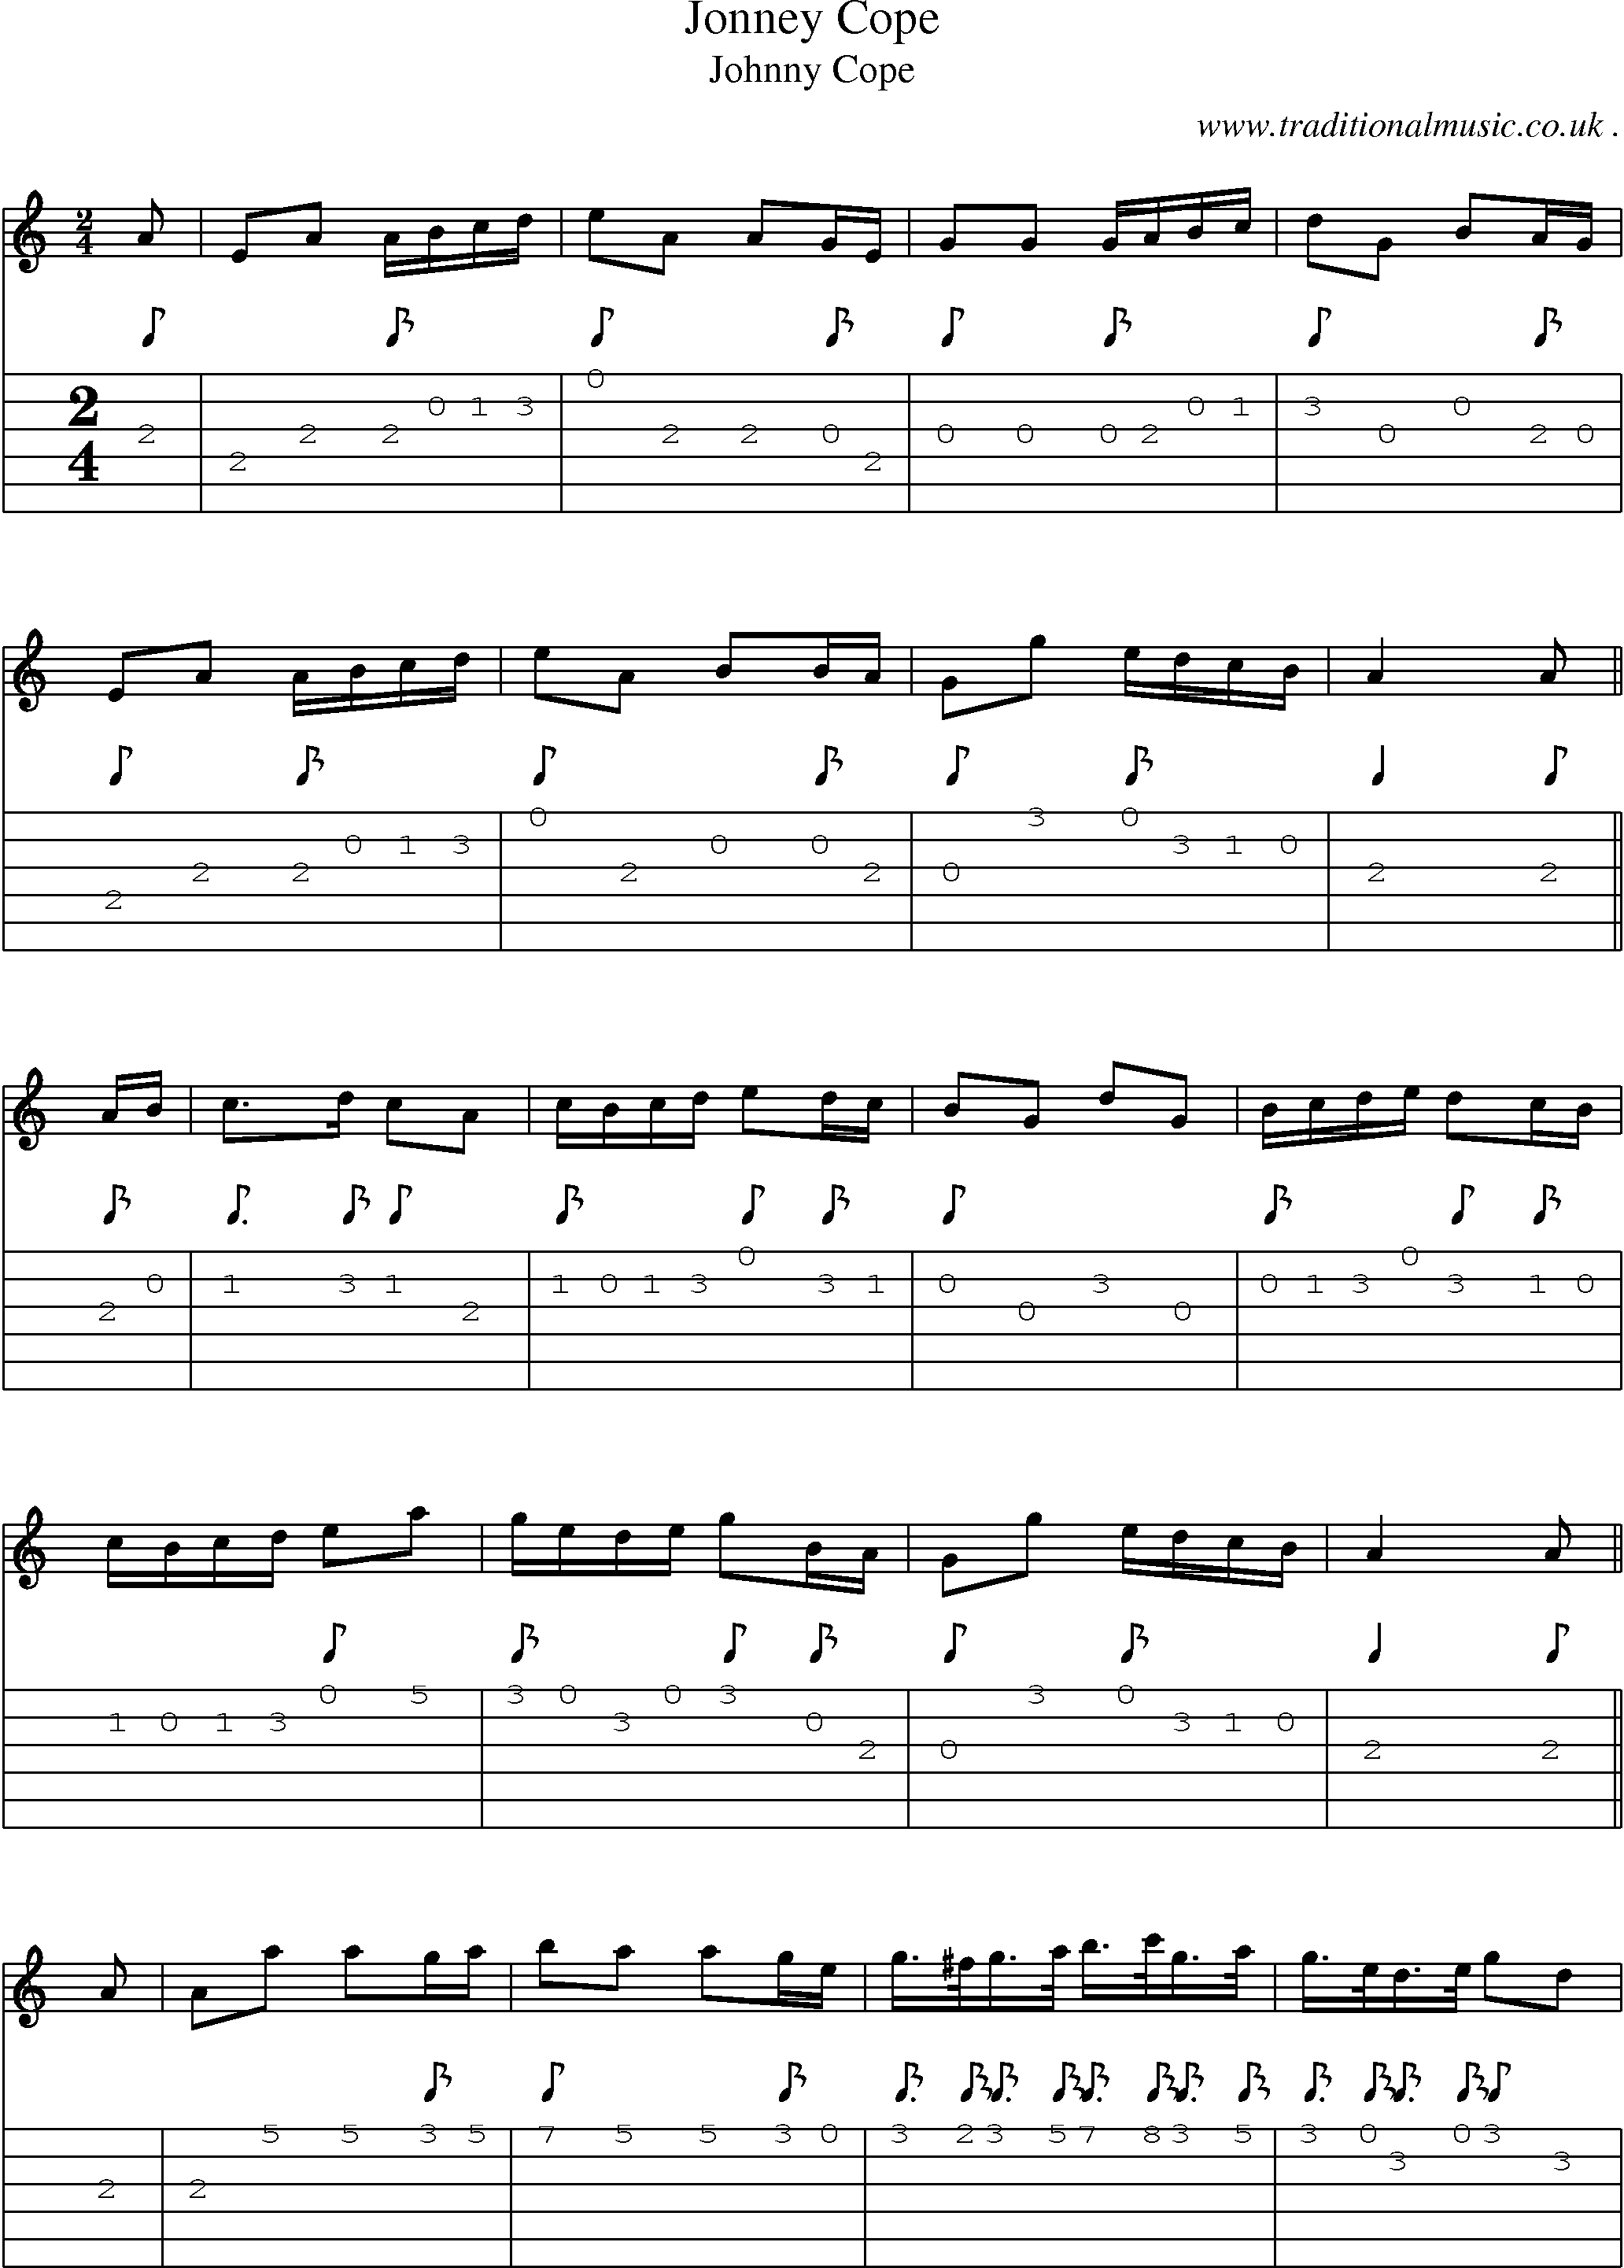 Sheet-Music and Guitar Tabs for Jonney Cope